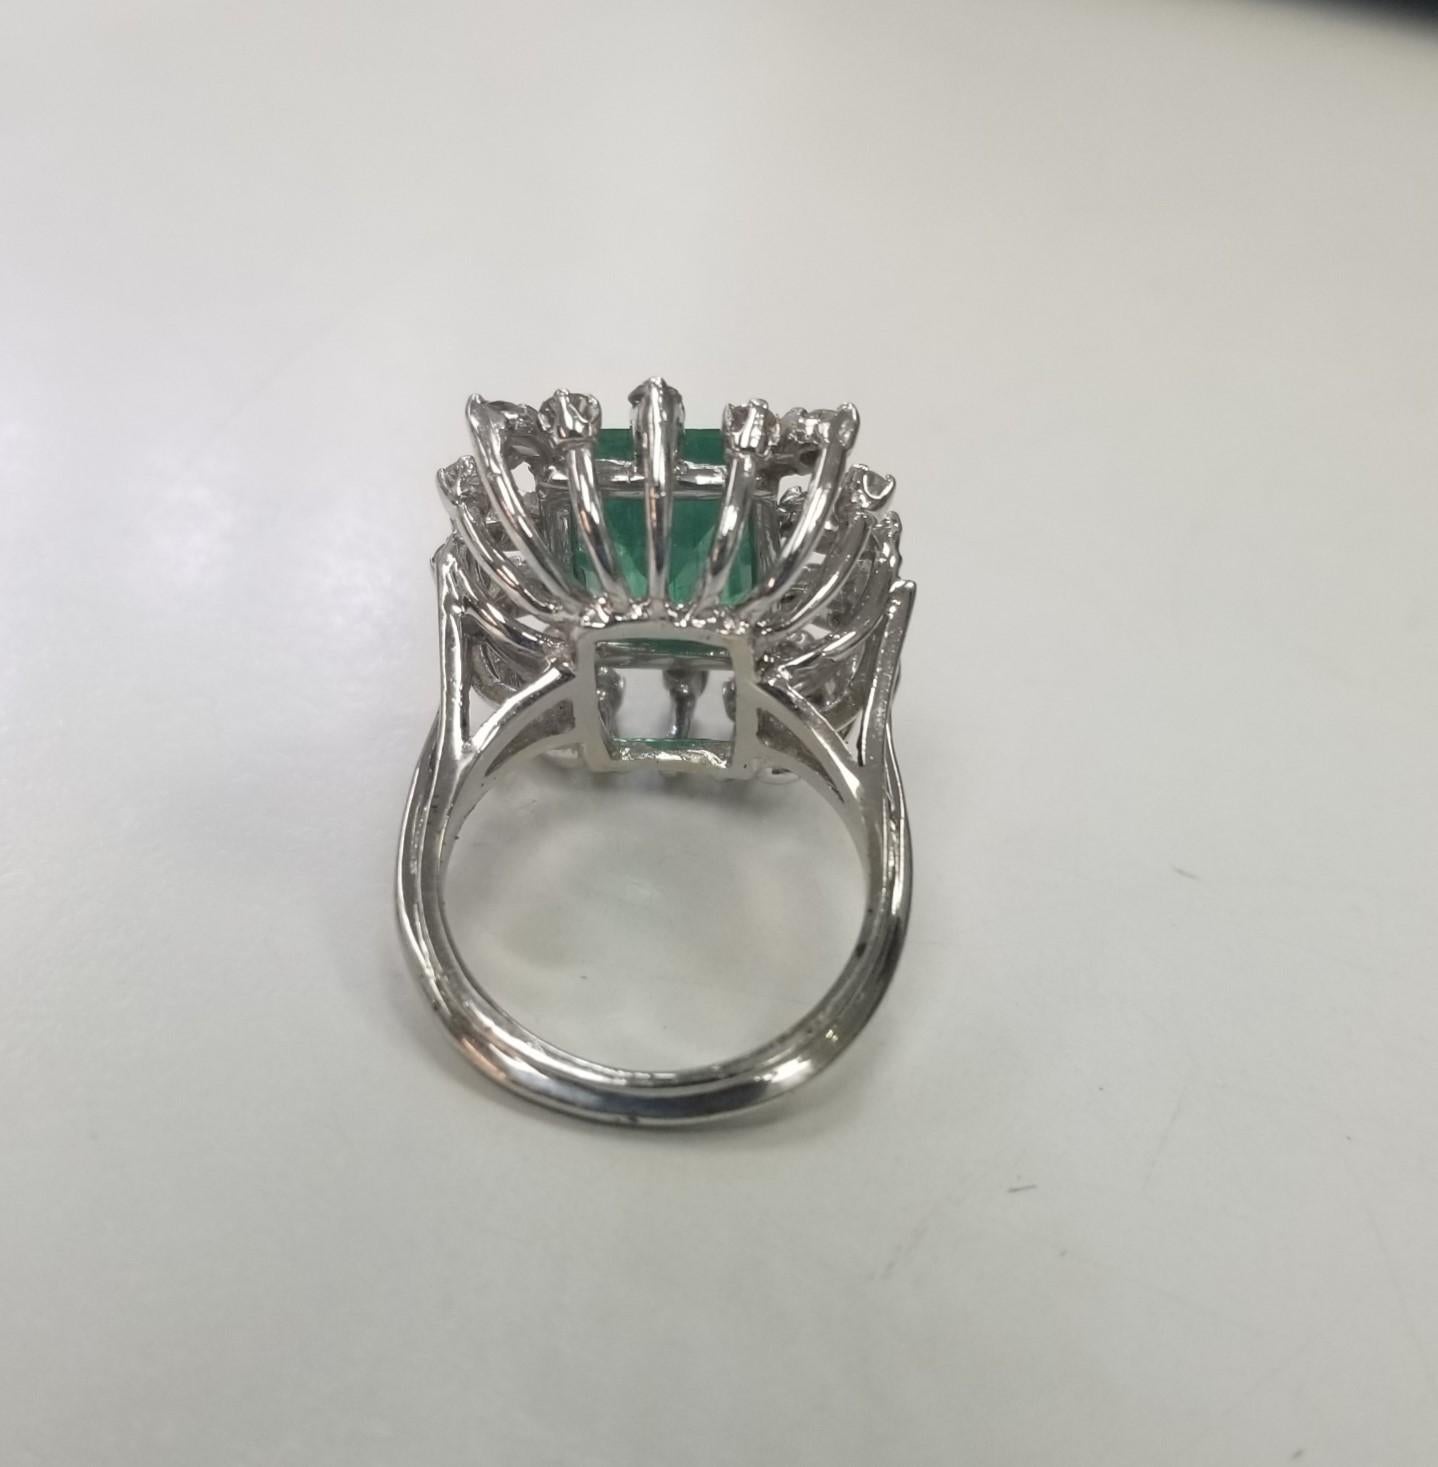 Contemporary 14k White Gold Emerald Cut Emerald and Diamond Cluster Ring